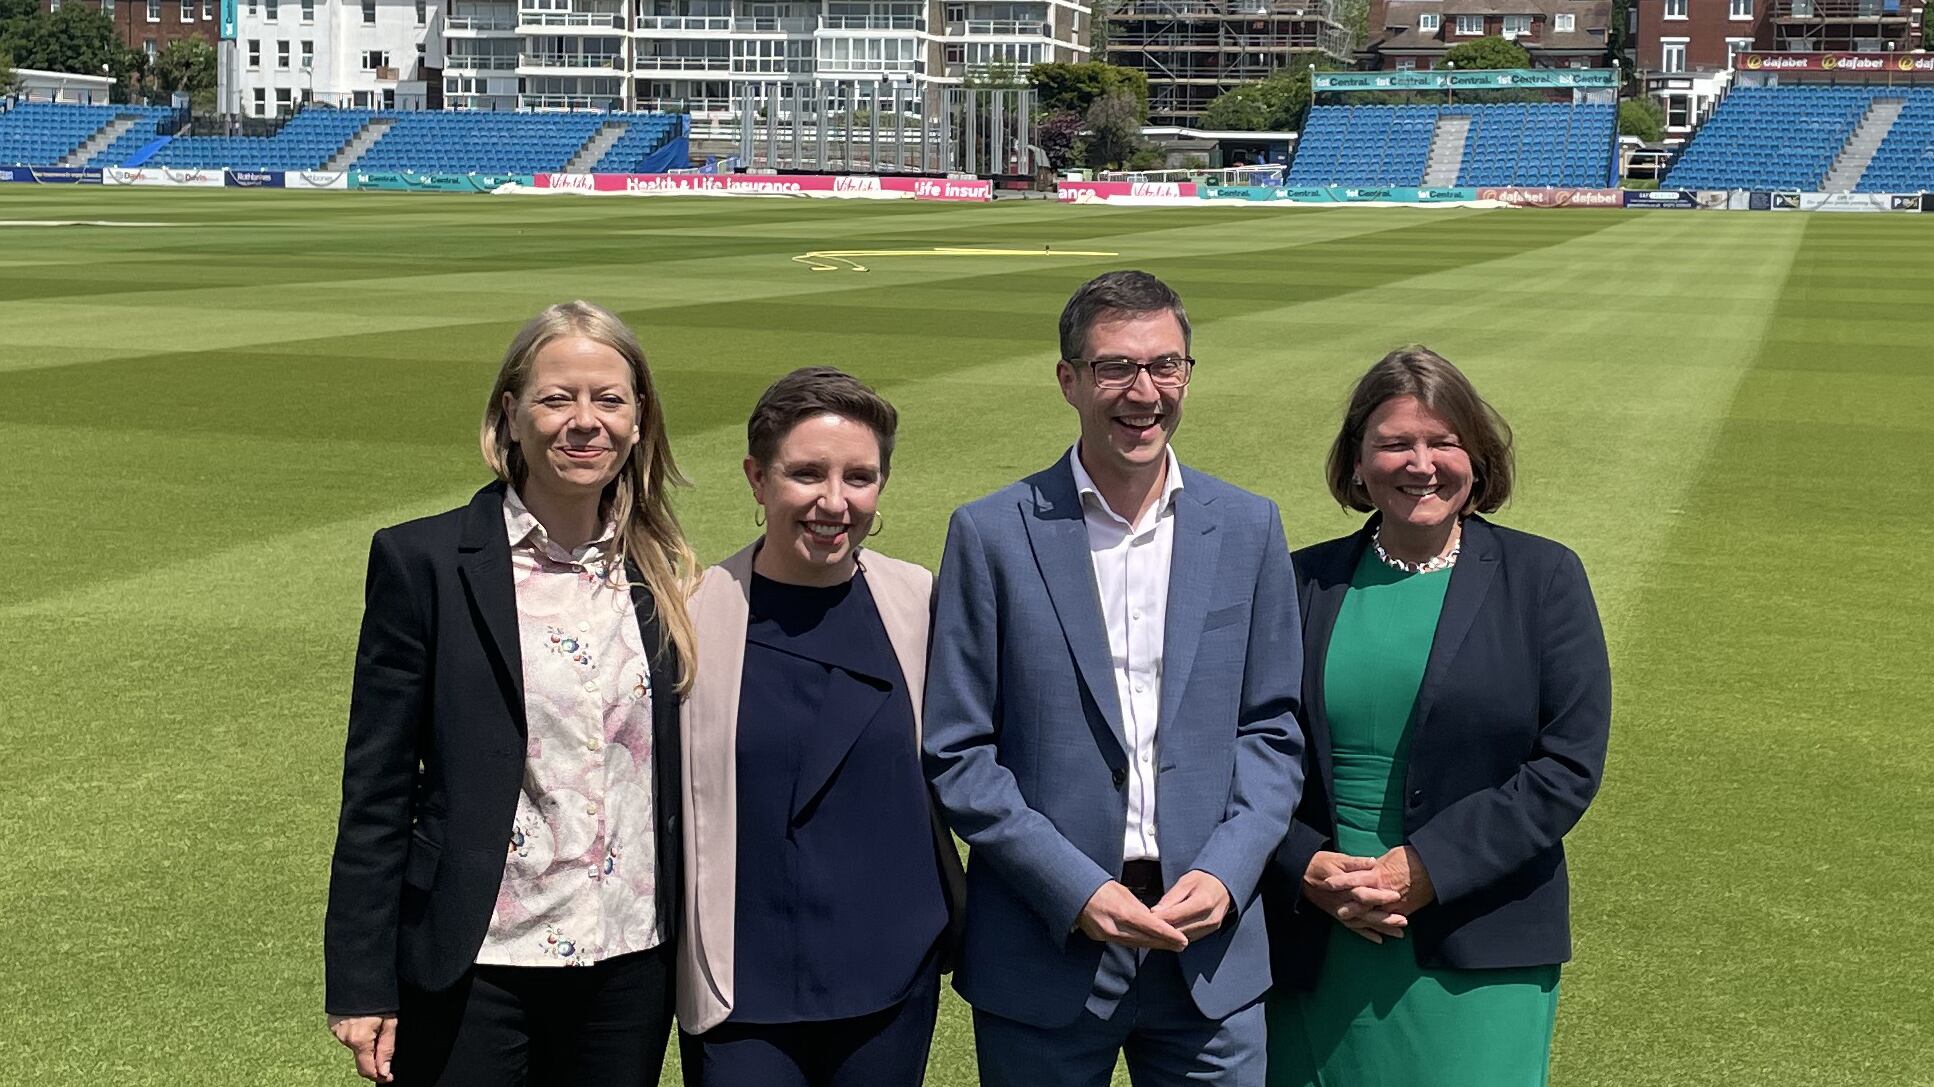 Green Party co-leaders Carla Denyer and Adrian Ramsay with candidates Sian Berry and Ellie Chowns on the pitch at Sussex County Cricket Club in Hove during the party’s manifesto launch